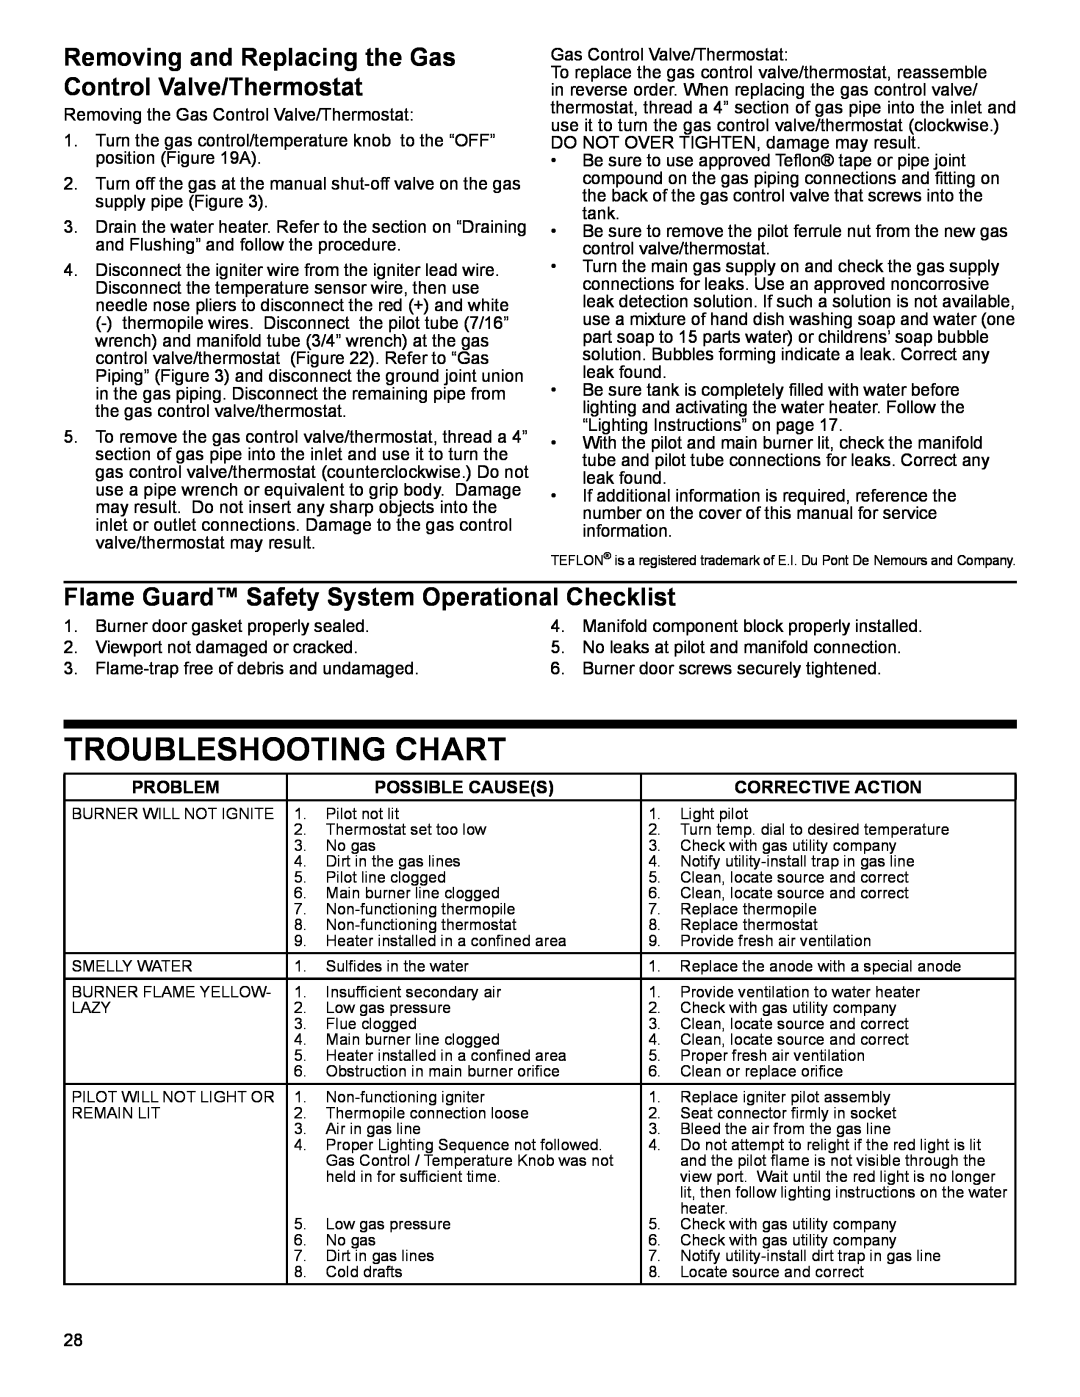 American Water Heater 318935-003 Troubleshooting Chart, Removing and Replacing the Gas Control Valve/Thermostat 